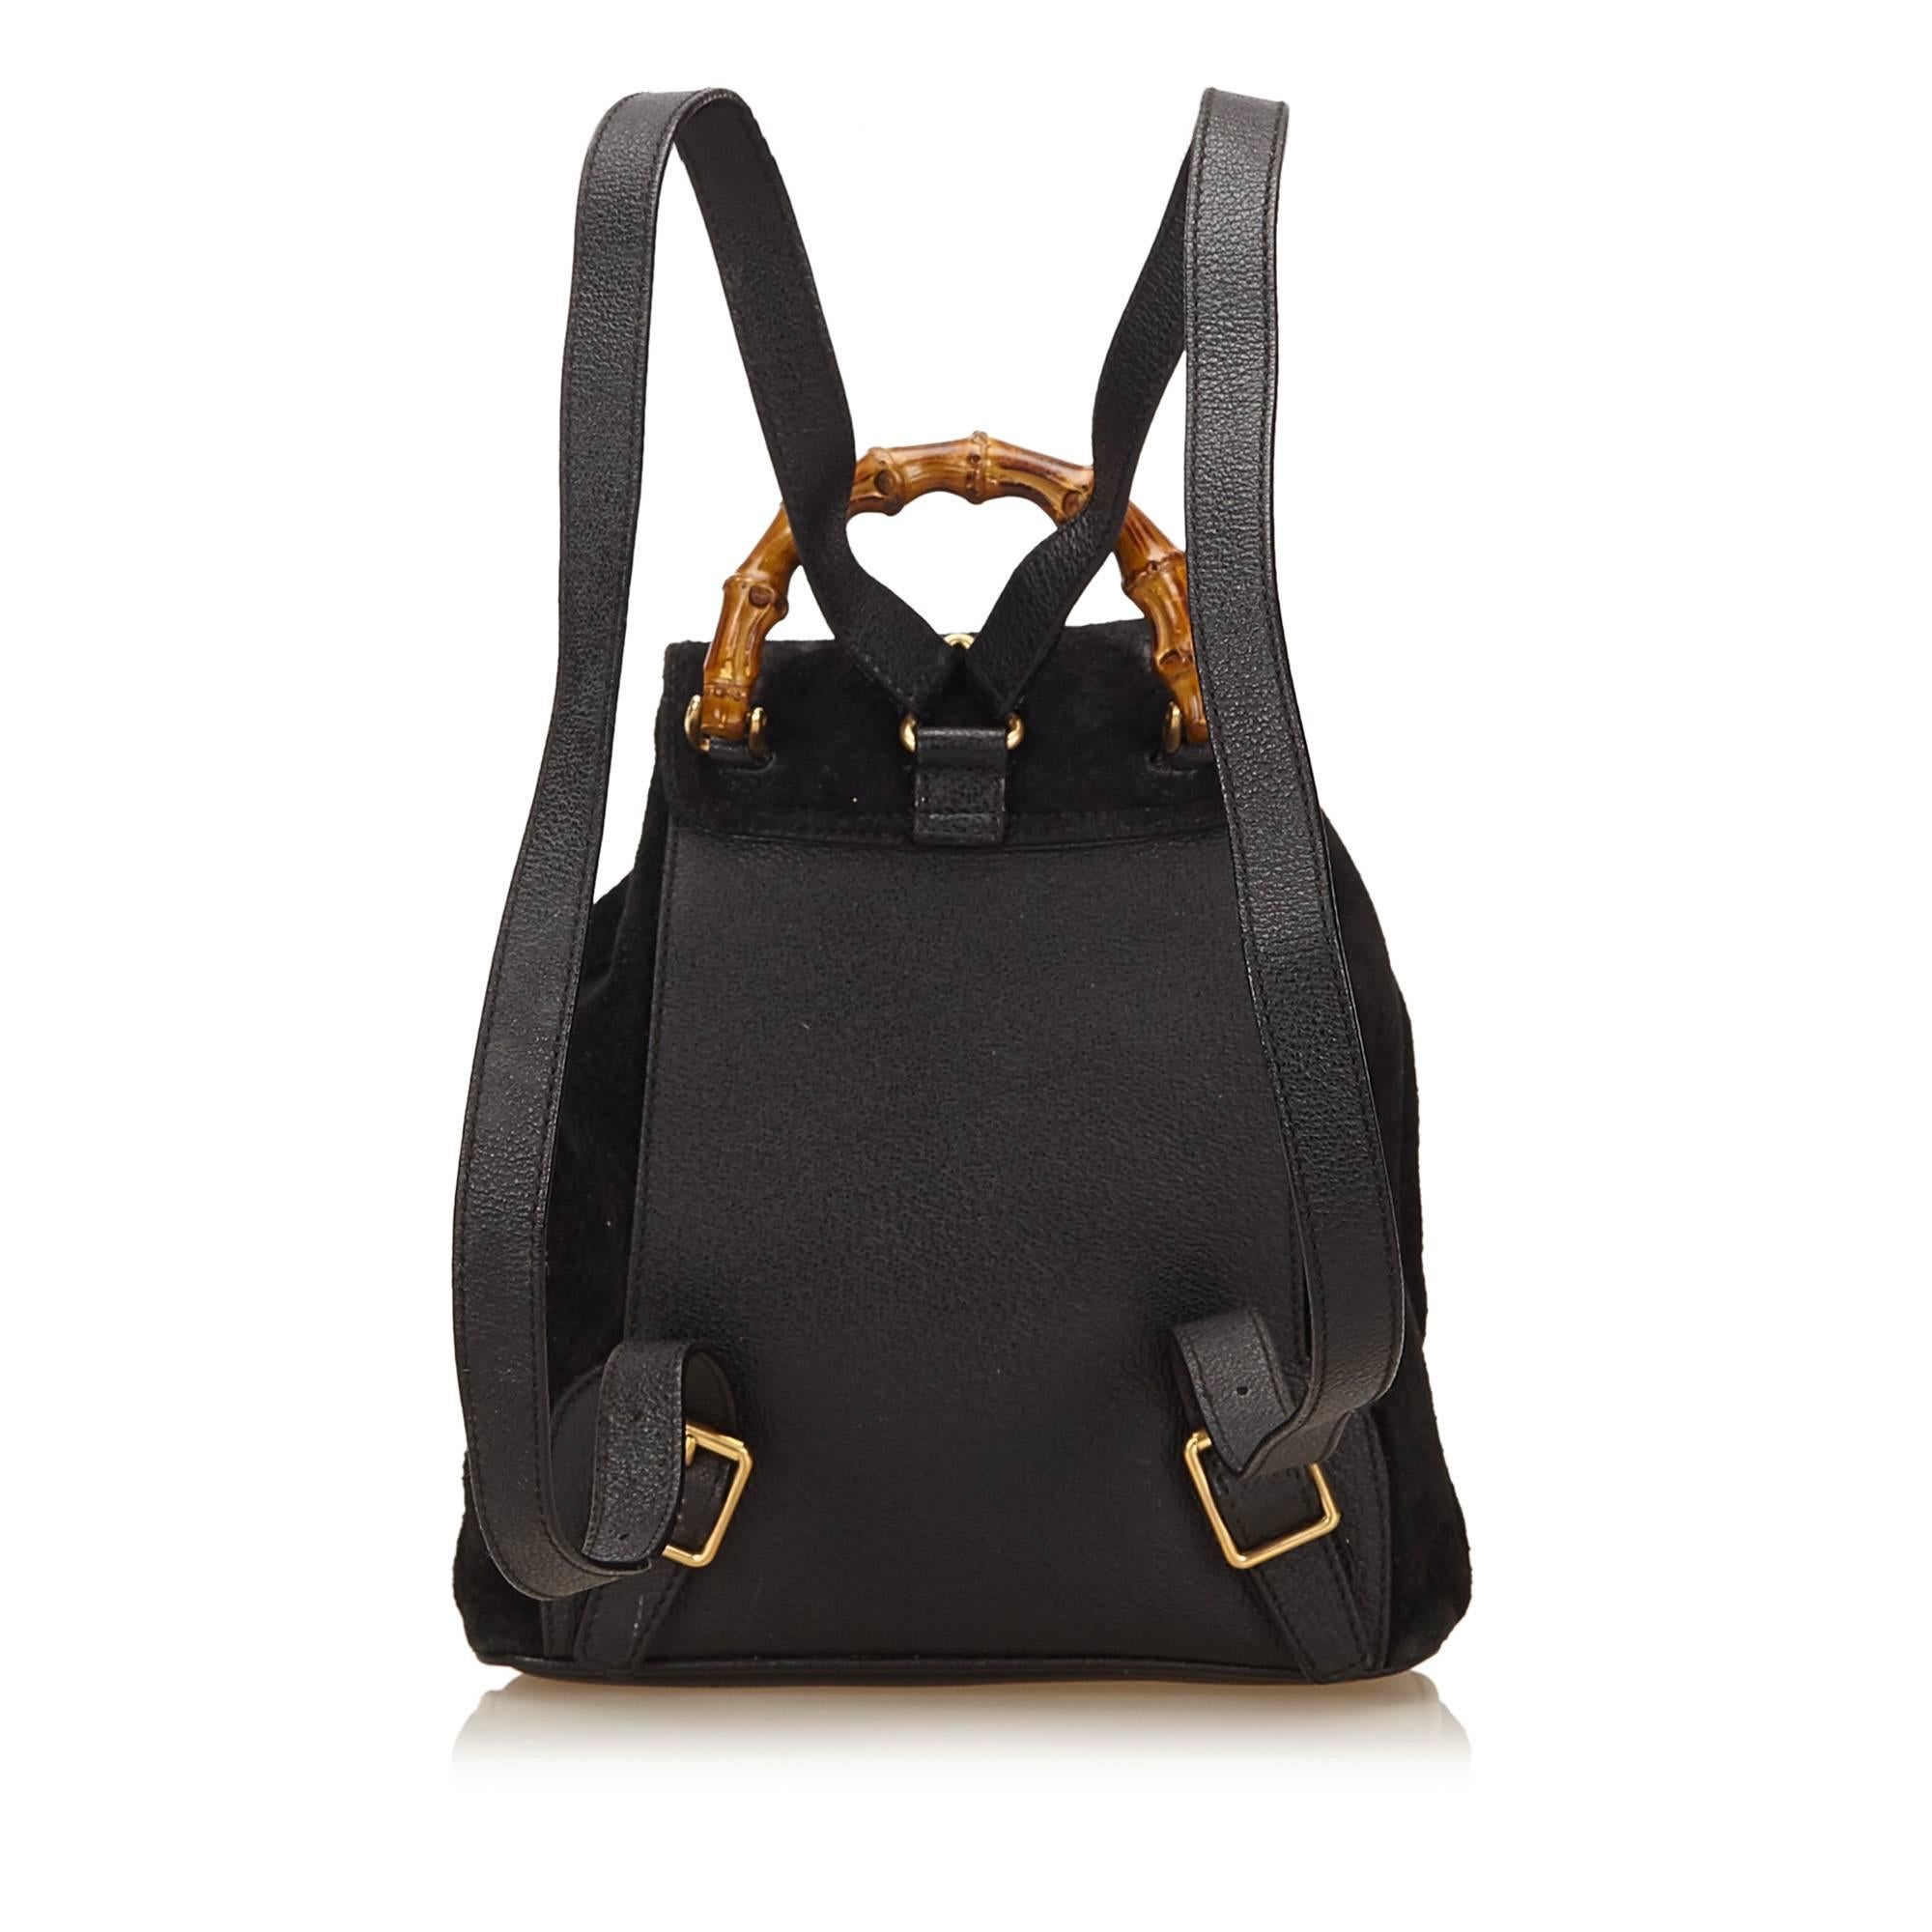 - This Gucci backpack features a suede body with leather trim, front exterior flap pocket with twist bamboo closure, adjustable leather shoulder straps, drawstring closure, and interior zip pocket. A classic Gucci backpack that it still in style